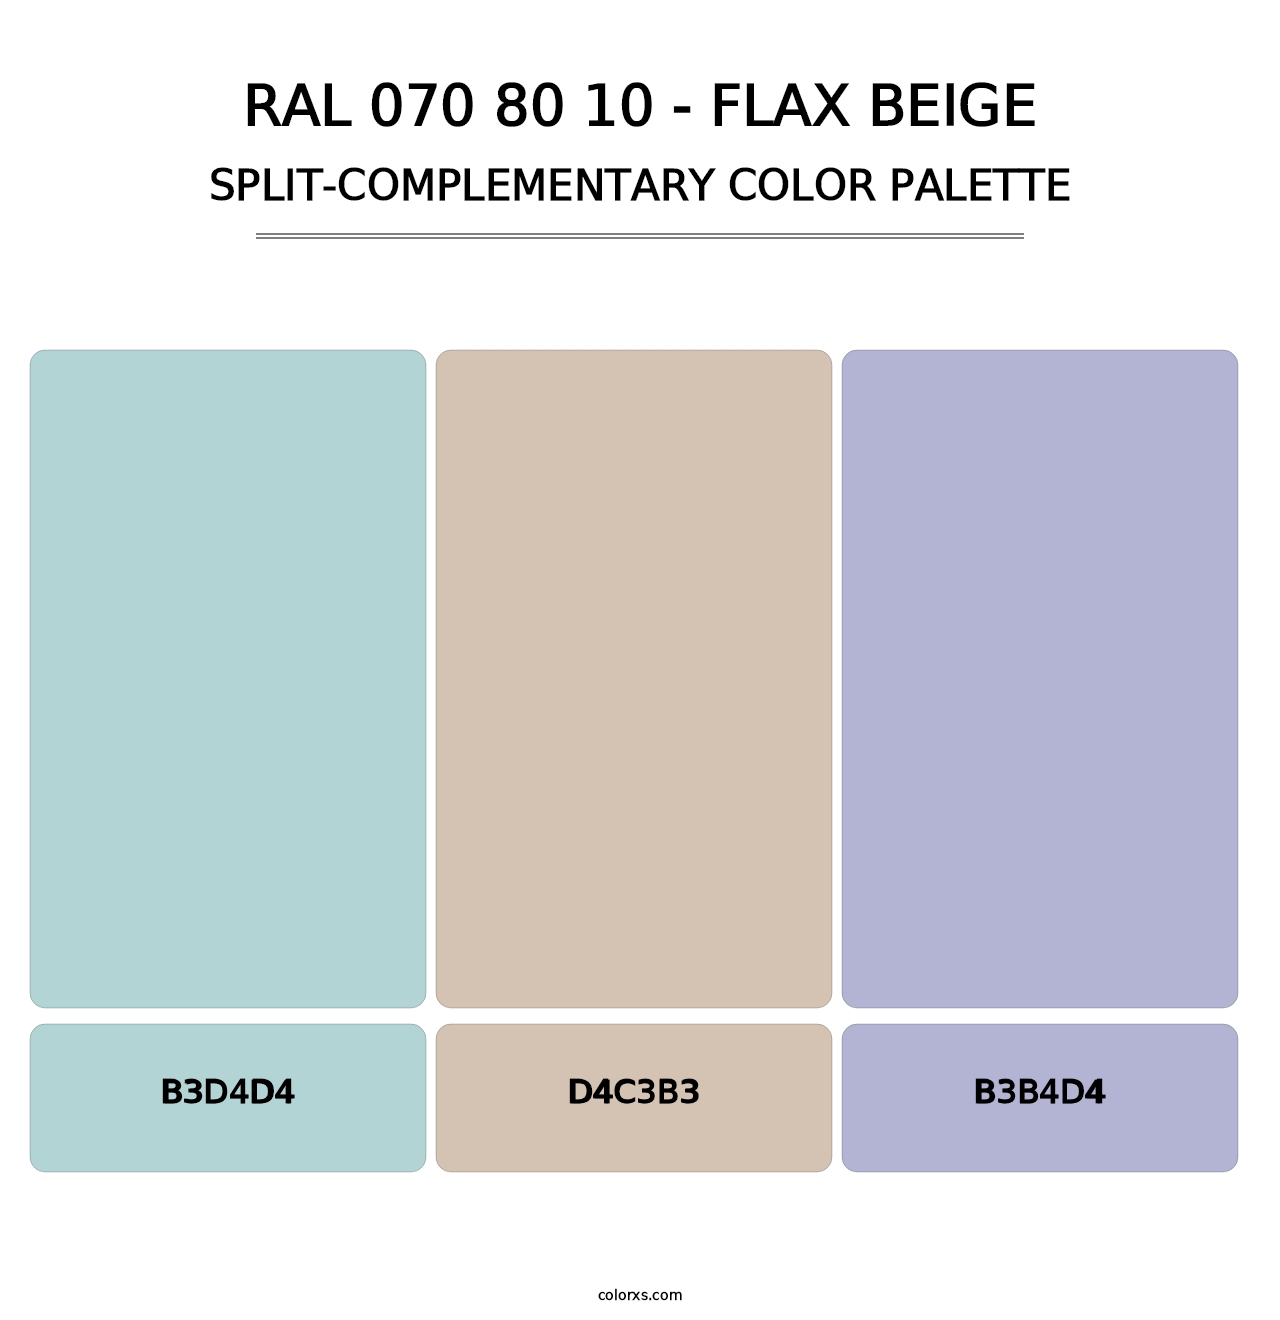 RAL 070 80 10 - Flax Beige - Split-Complementary Color Palette